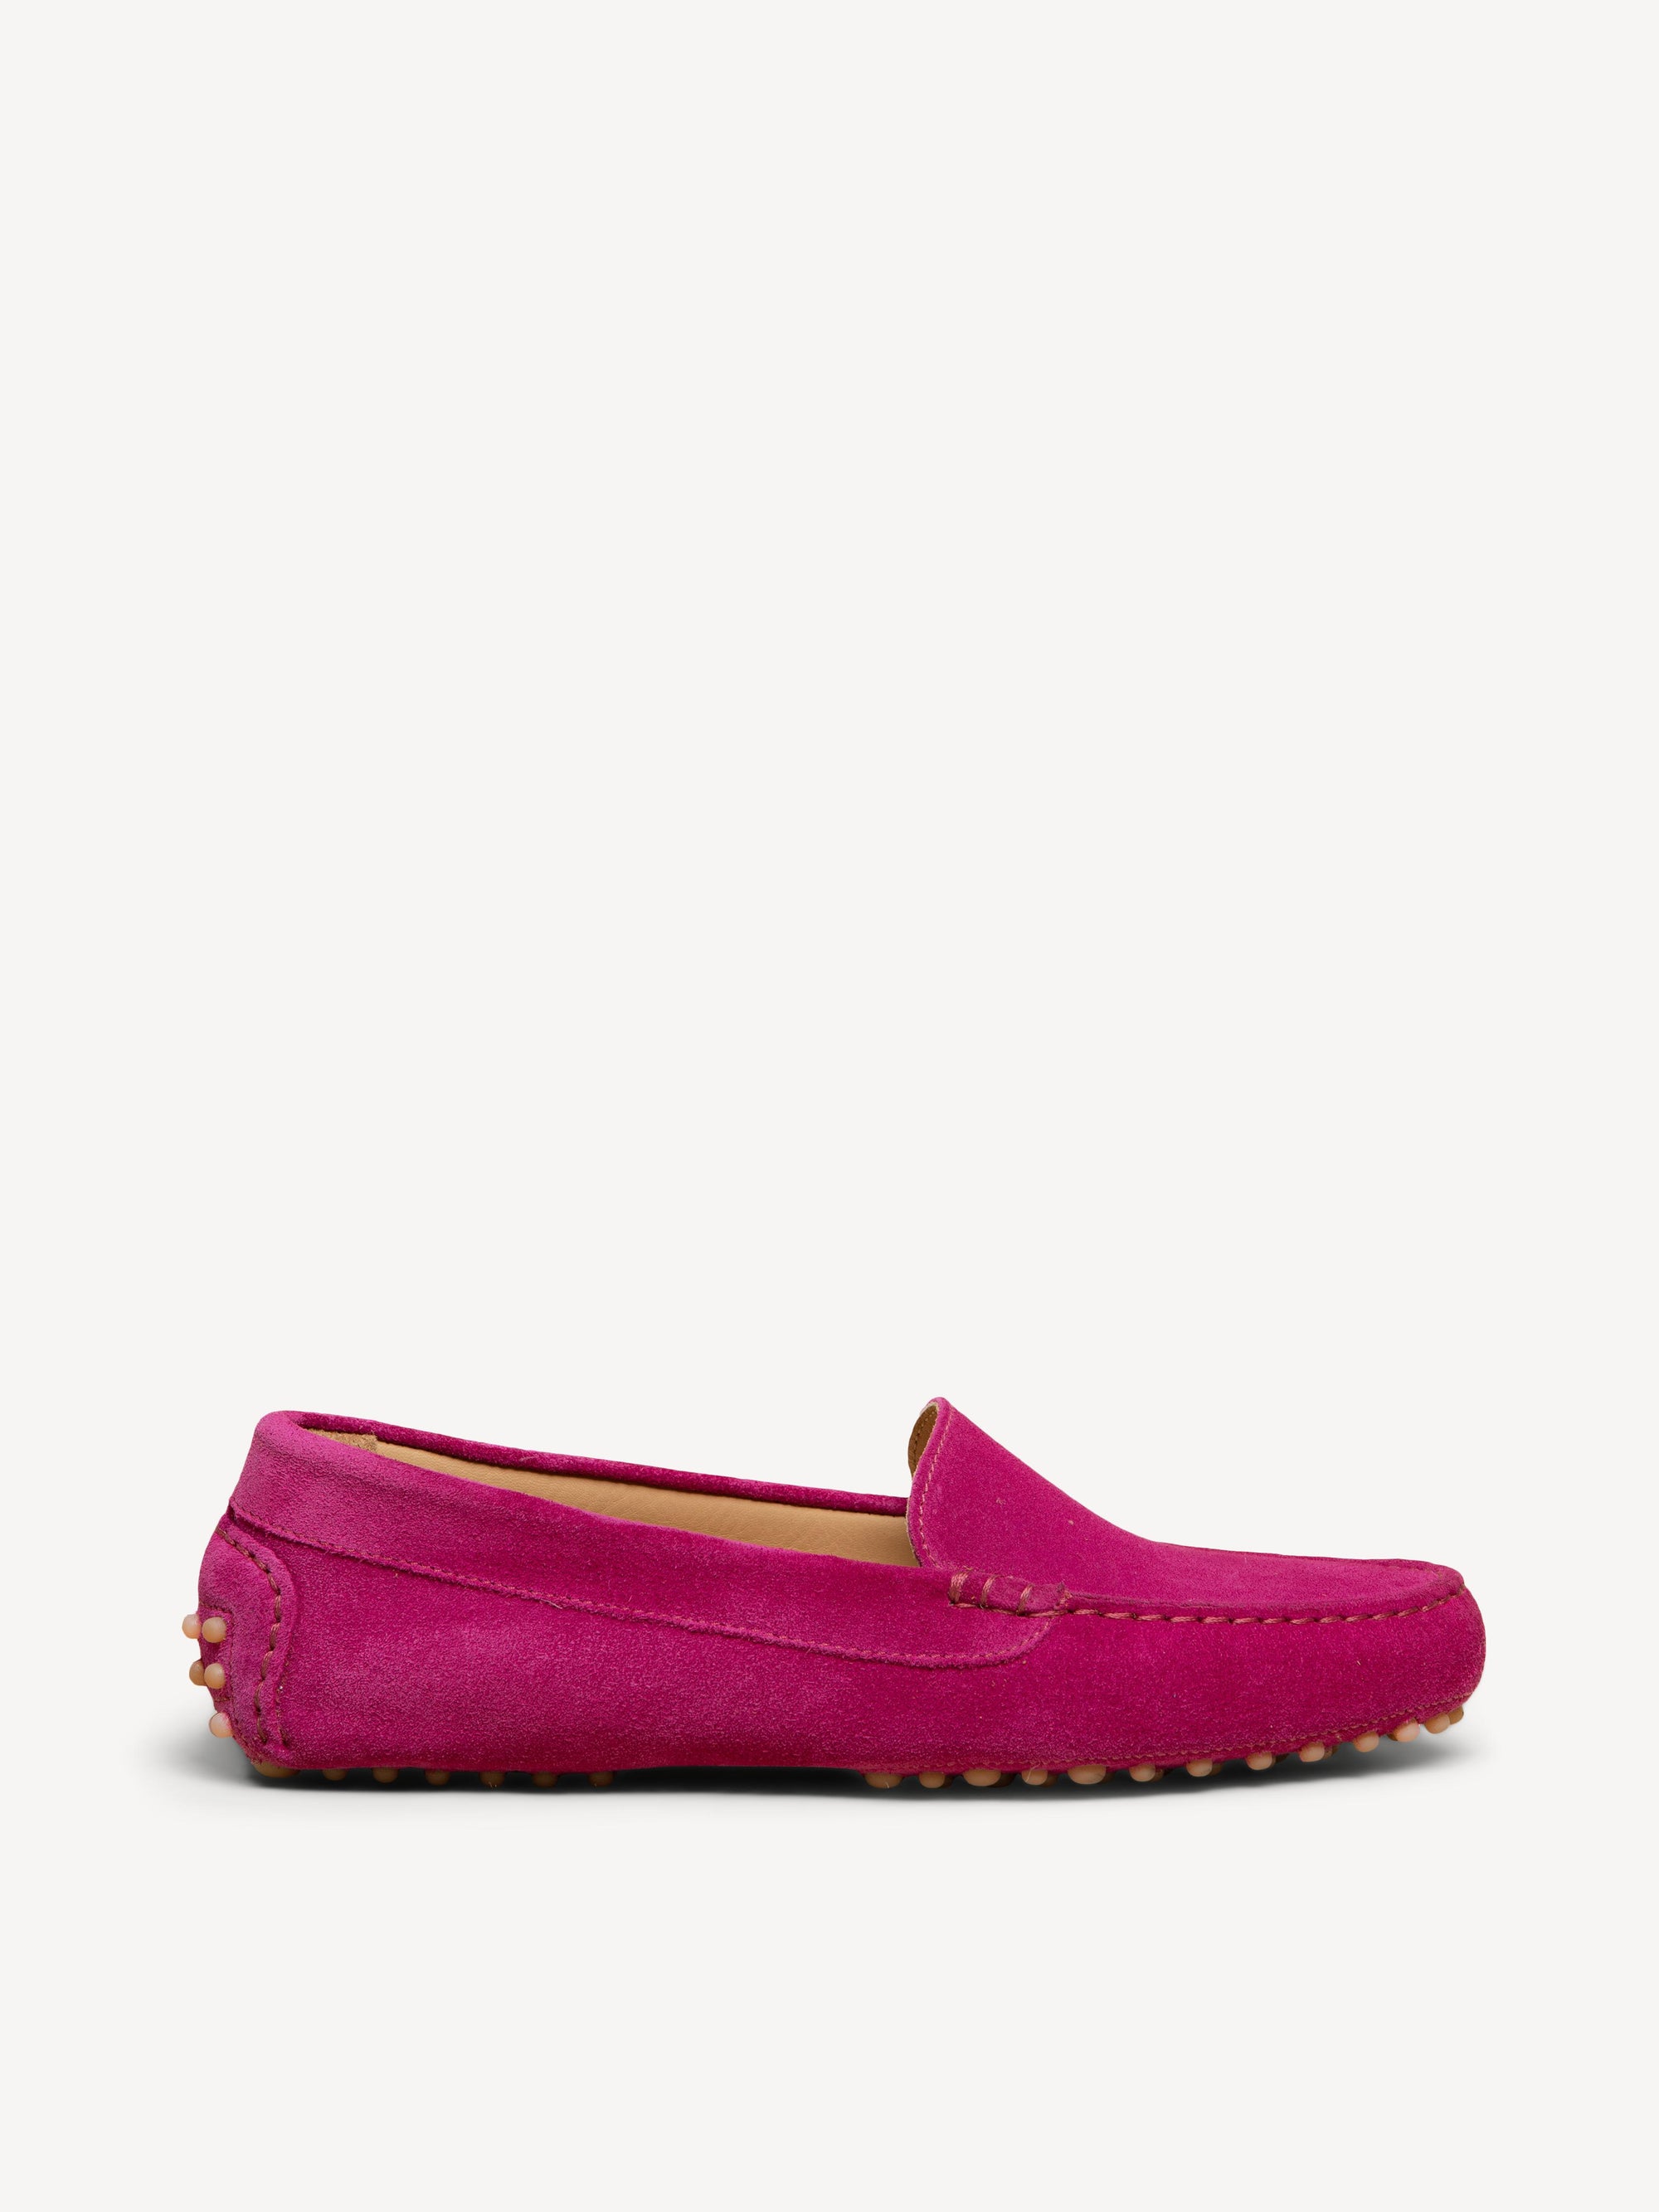 The Felize | Hand-stitched Suede Driving Moccasin | M.Gemi